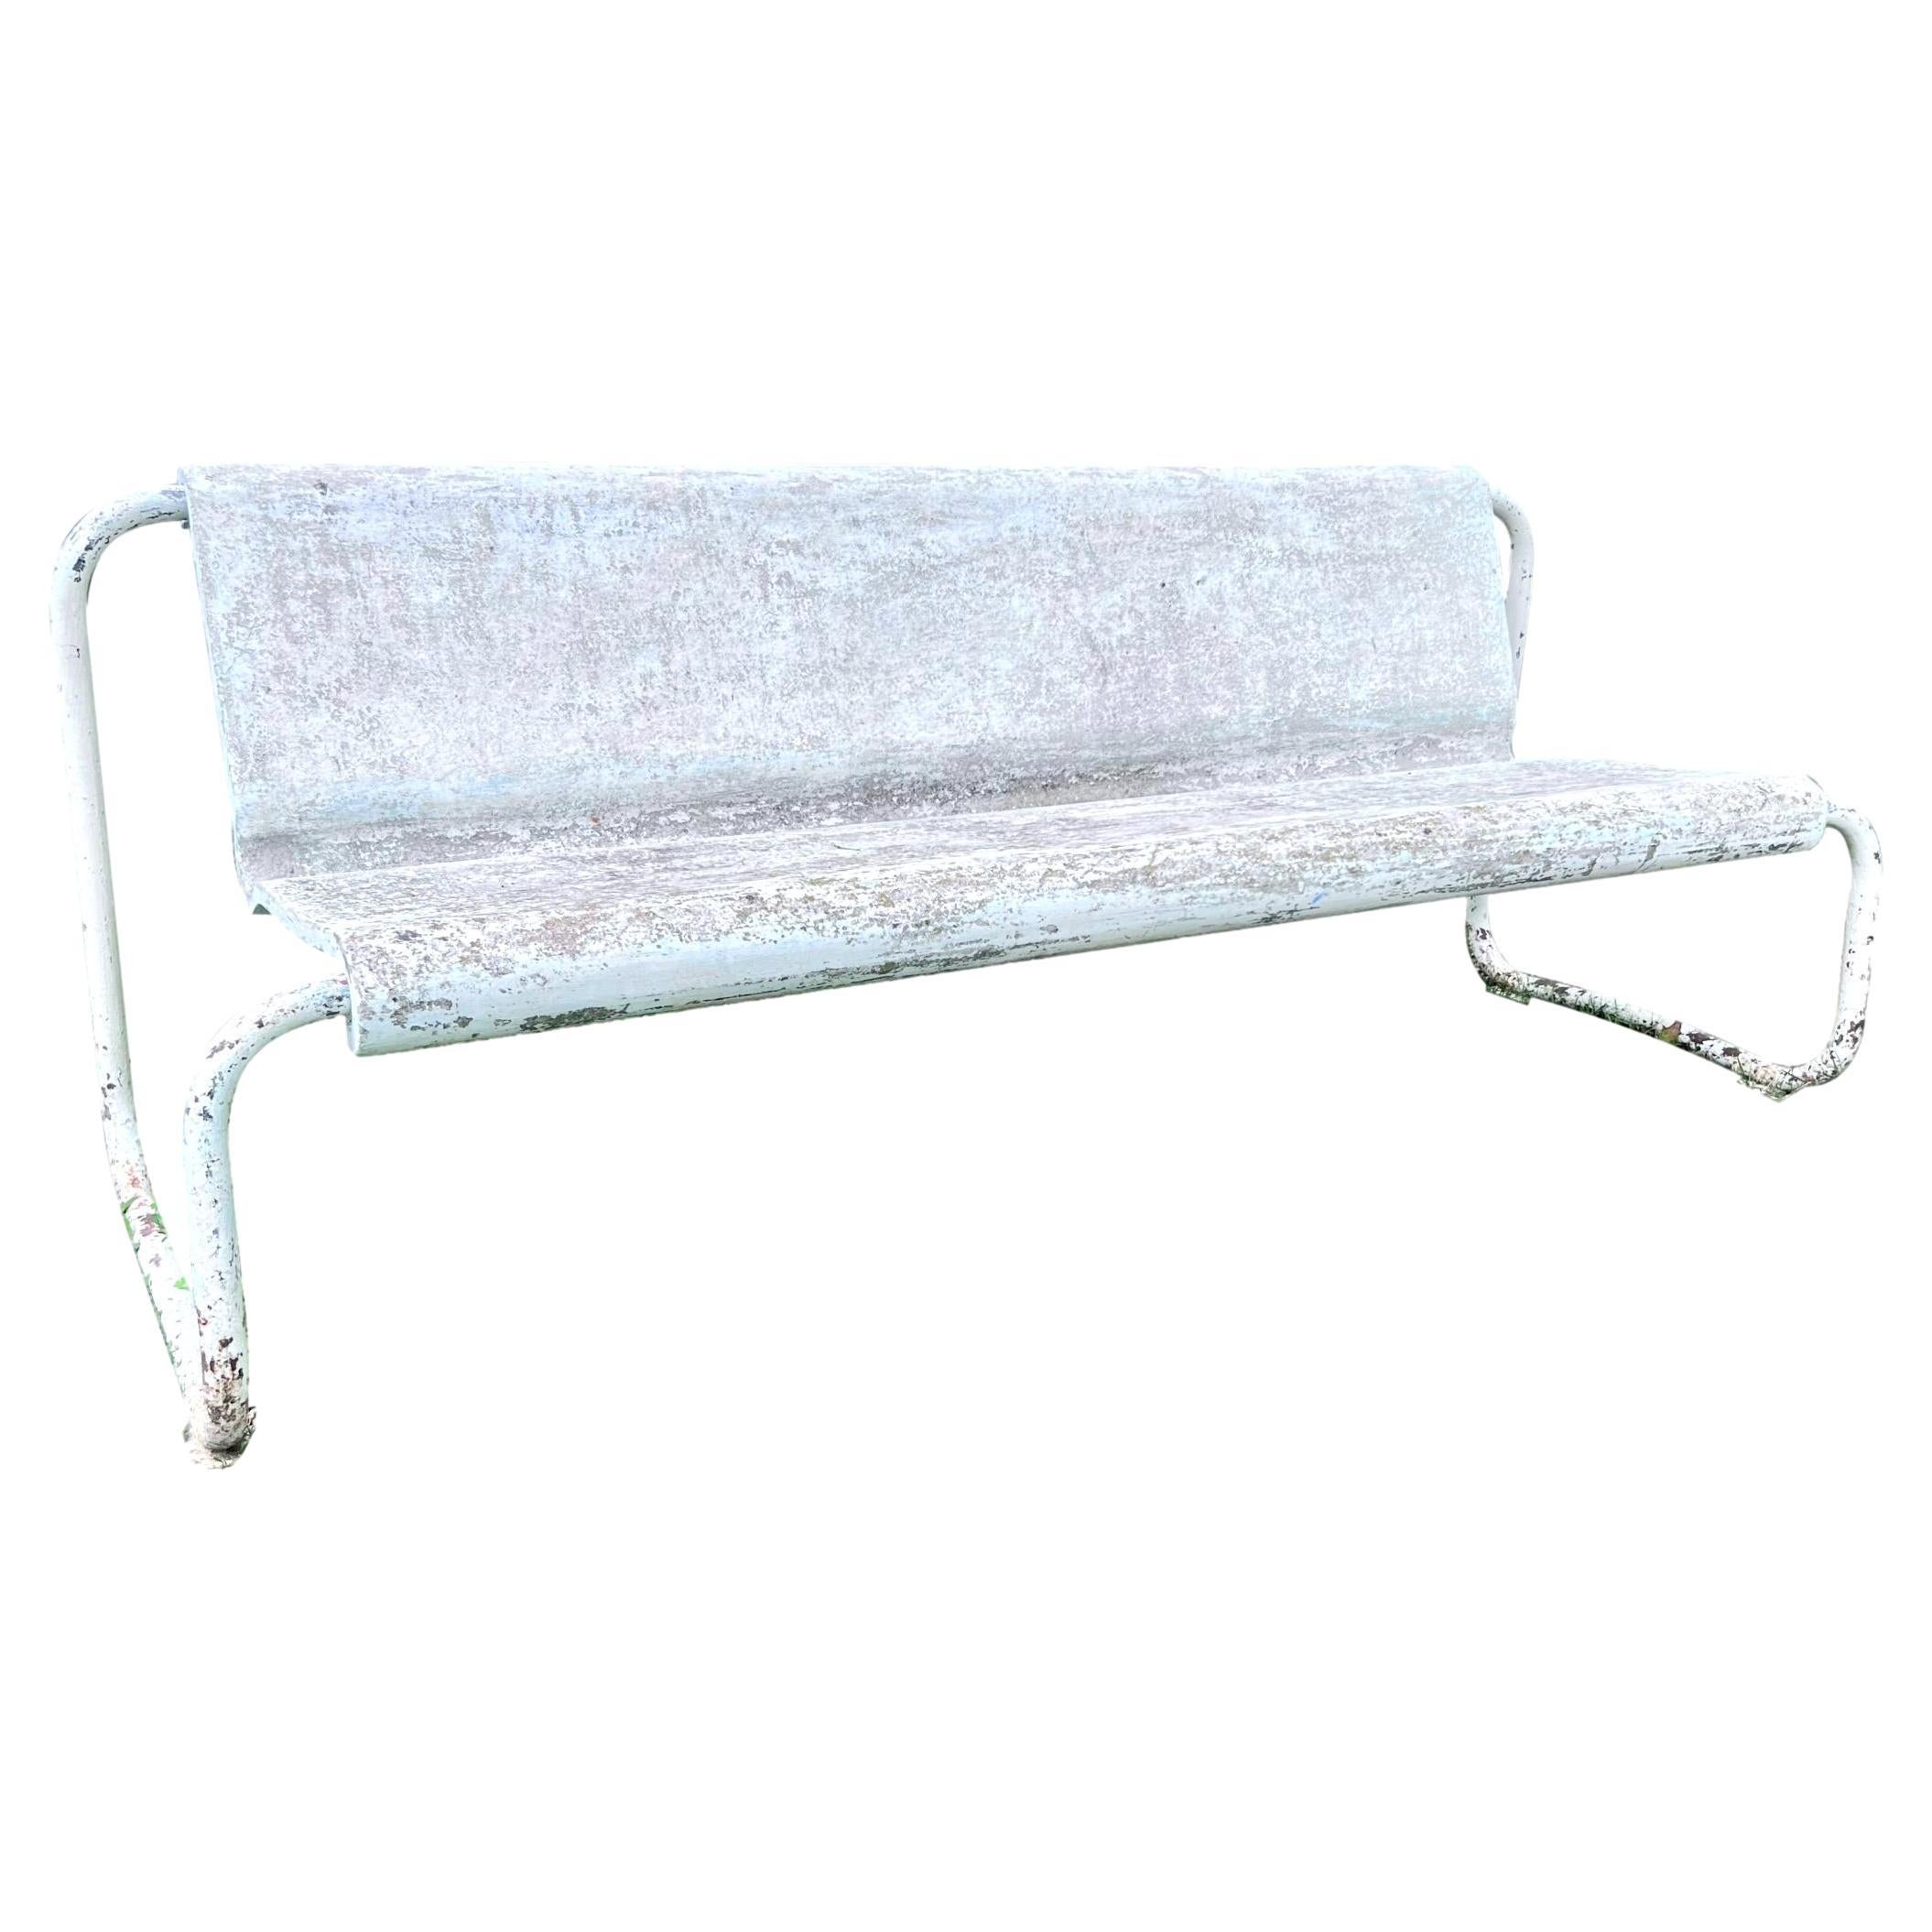 Willy Guhl Concrete and Steel Floating Bench, 1960s Switzerland For Sale